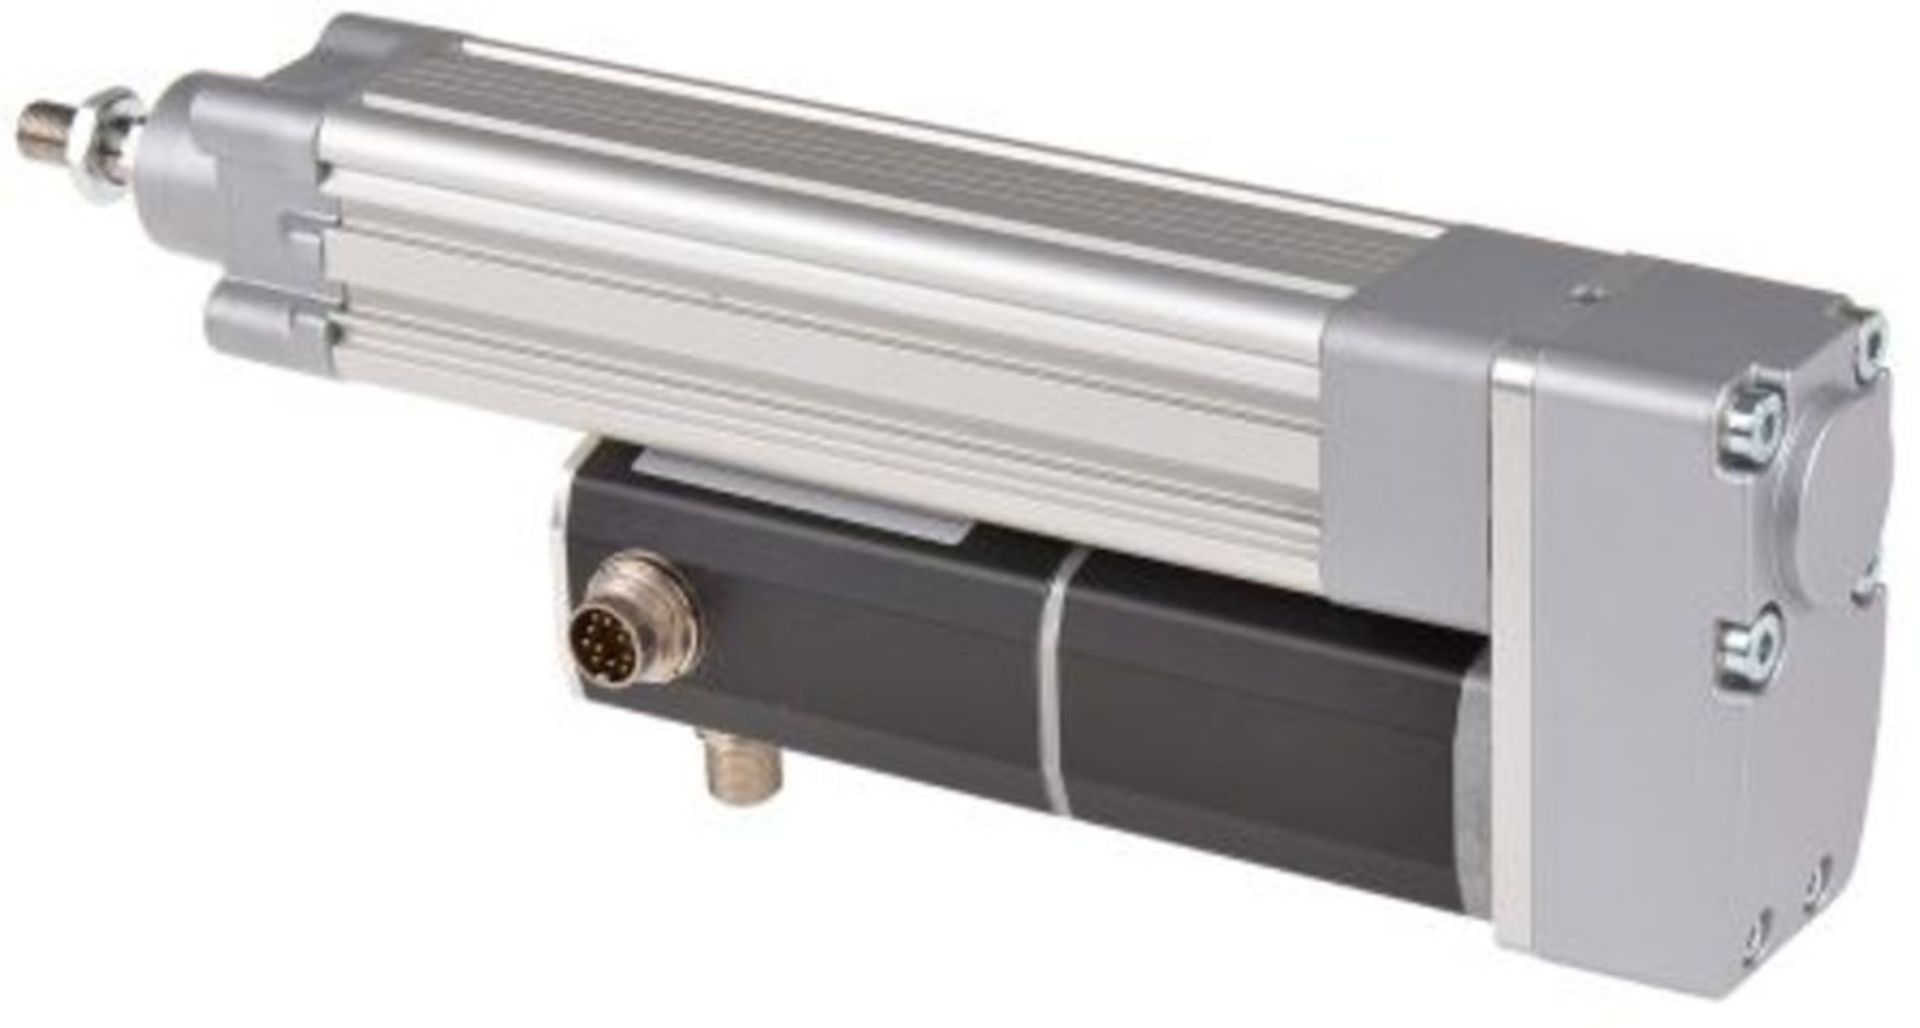 SKF Linear Actuator CASM-32 Series, 100mm stroke - 8802090 - Image 4 of 4